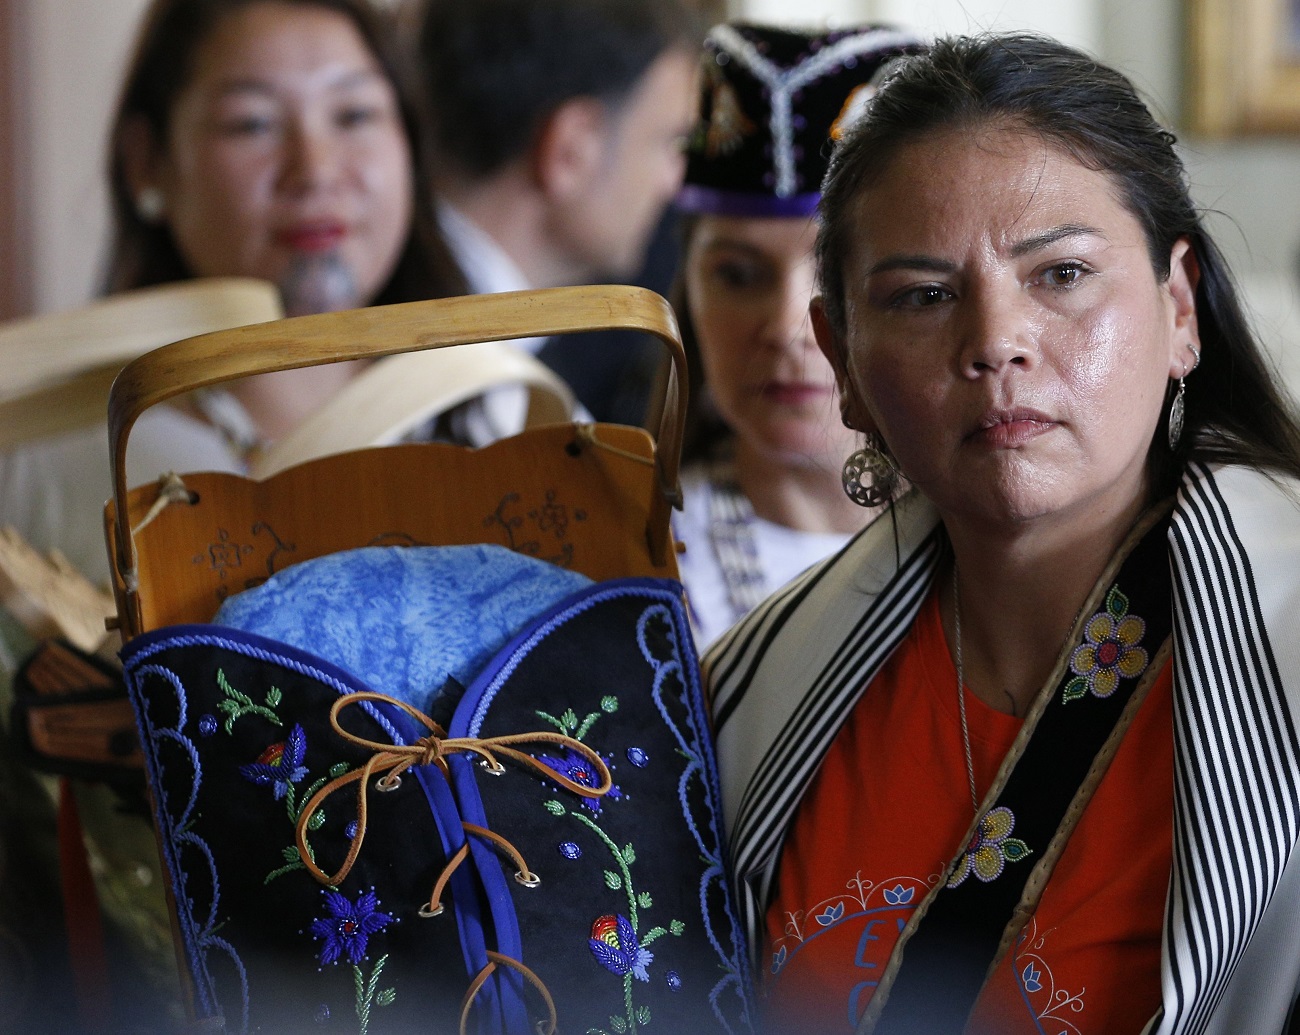 An Indigenous woman displays a cradleboard as Pope Francis meets with a delegation of Indigenous peoples in the archbishop's residence in Quebec City. Indigenous leaders want Pope Francis to help them get information about the more than 4,000 children who died at Canada's residential schools and the thousands of others who never returned home from the schools